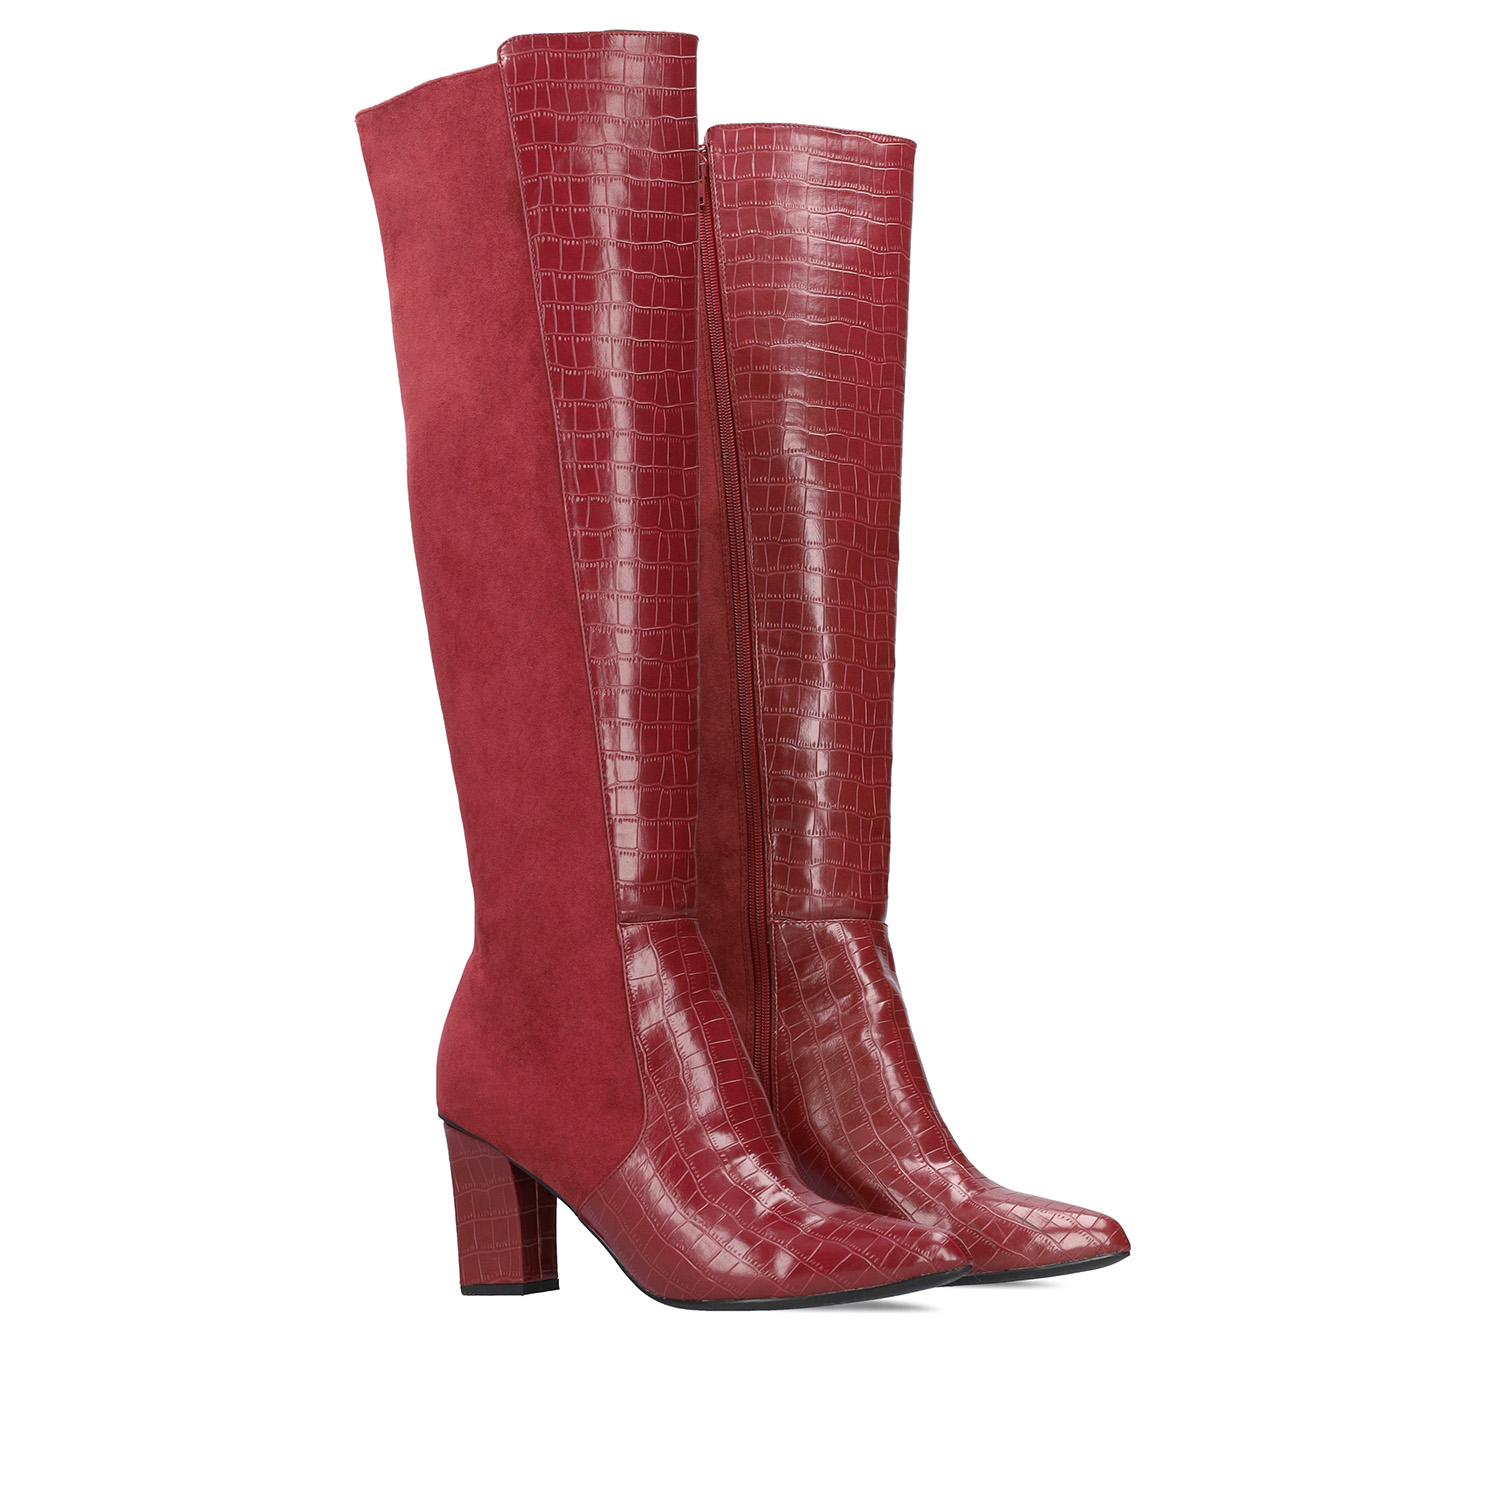 Heeled knee-high boots combined burgundy faux croc leather with faux suede. 